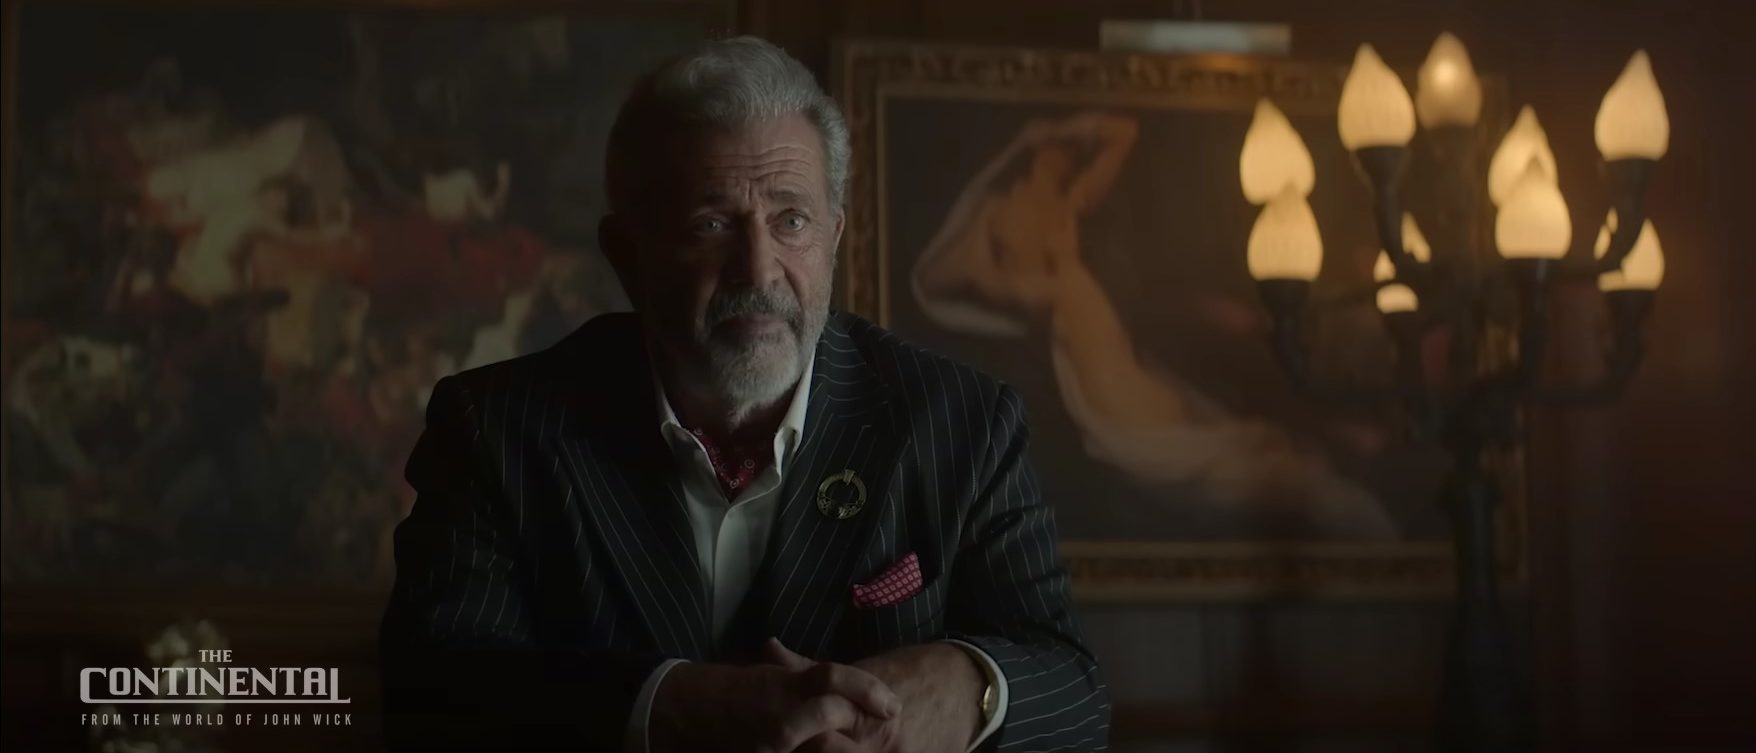 Mel Gibson Joins The ‘John Wick’ Universe In New Trailer | The Daily Caller